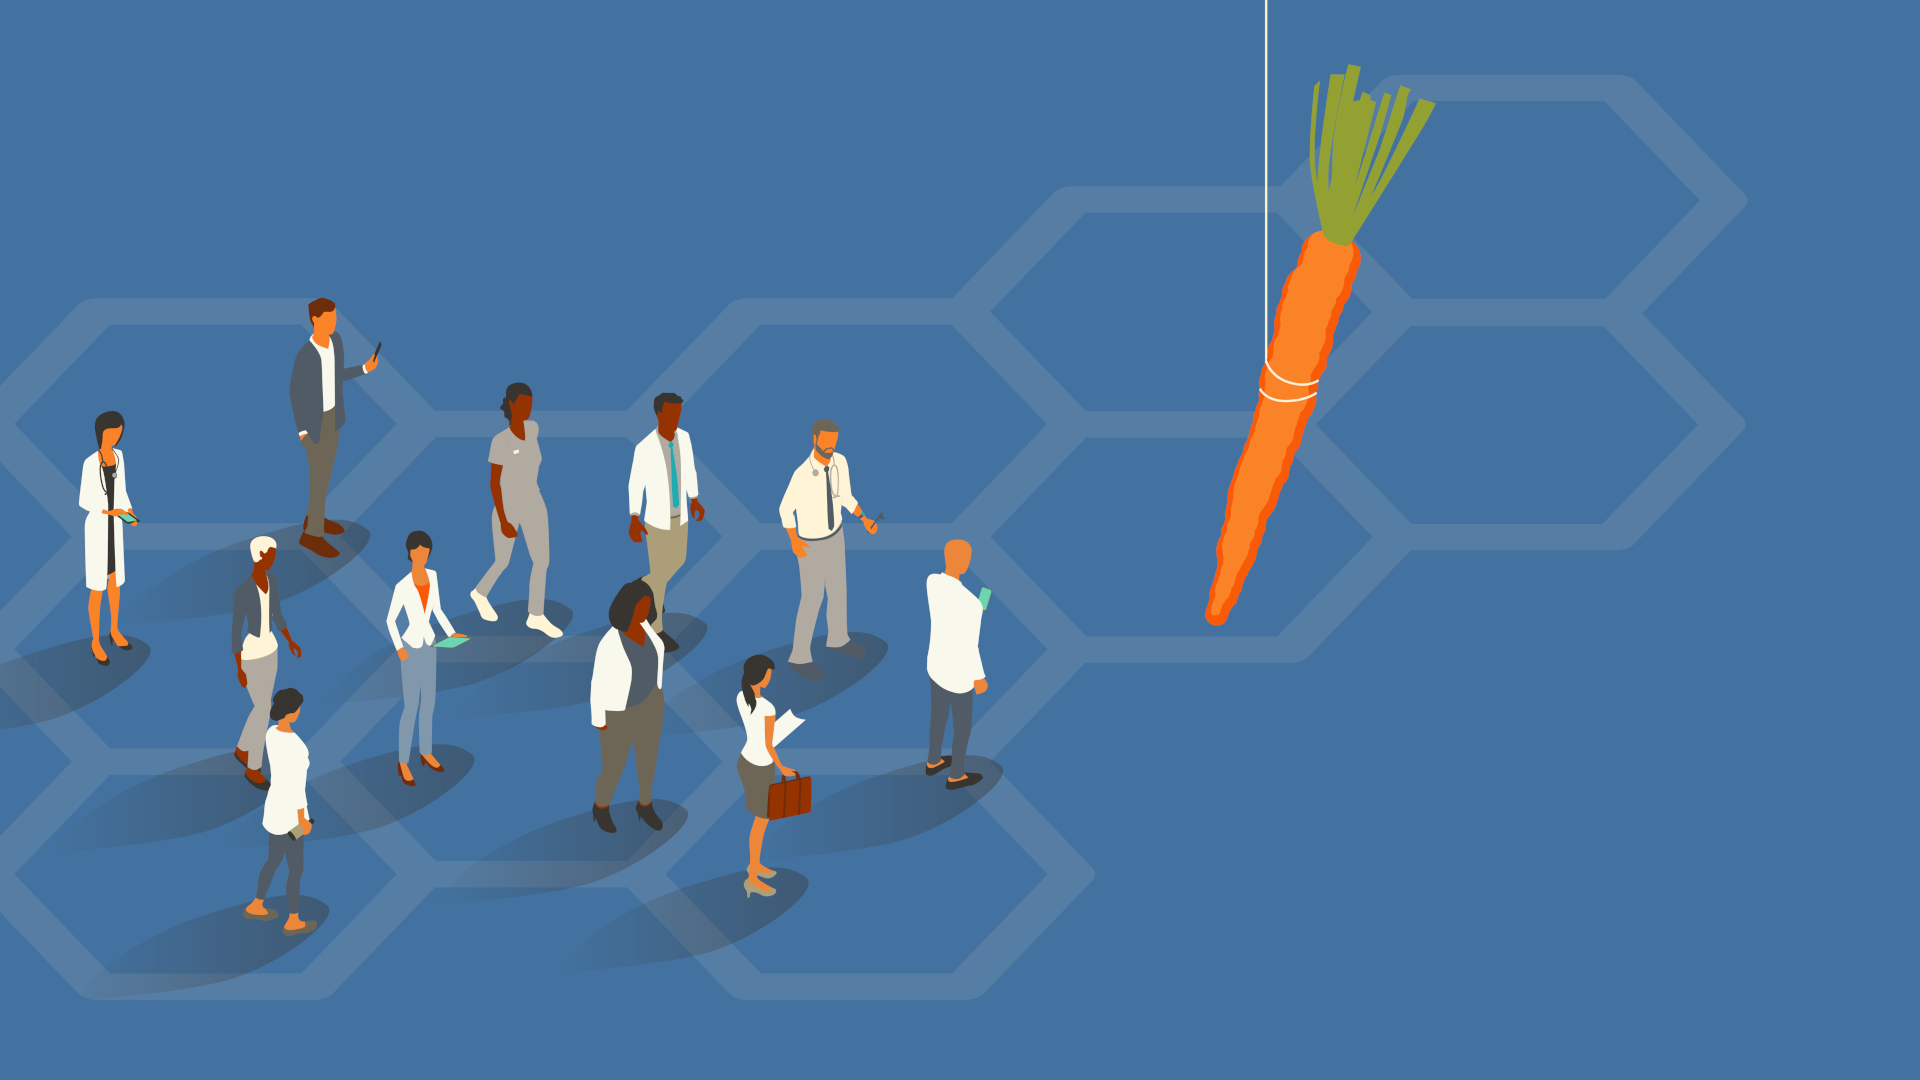 A group of 11 healthcare professionals follow an oversized, dangling carrot to illustrate the concept of incentivization.